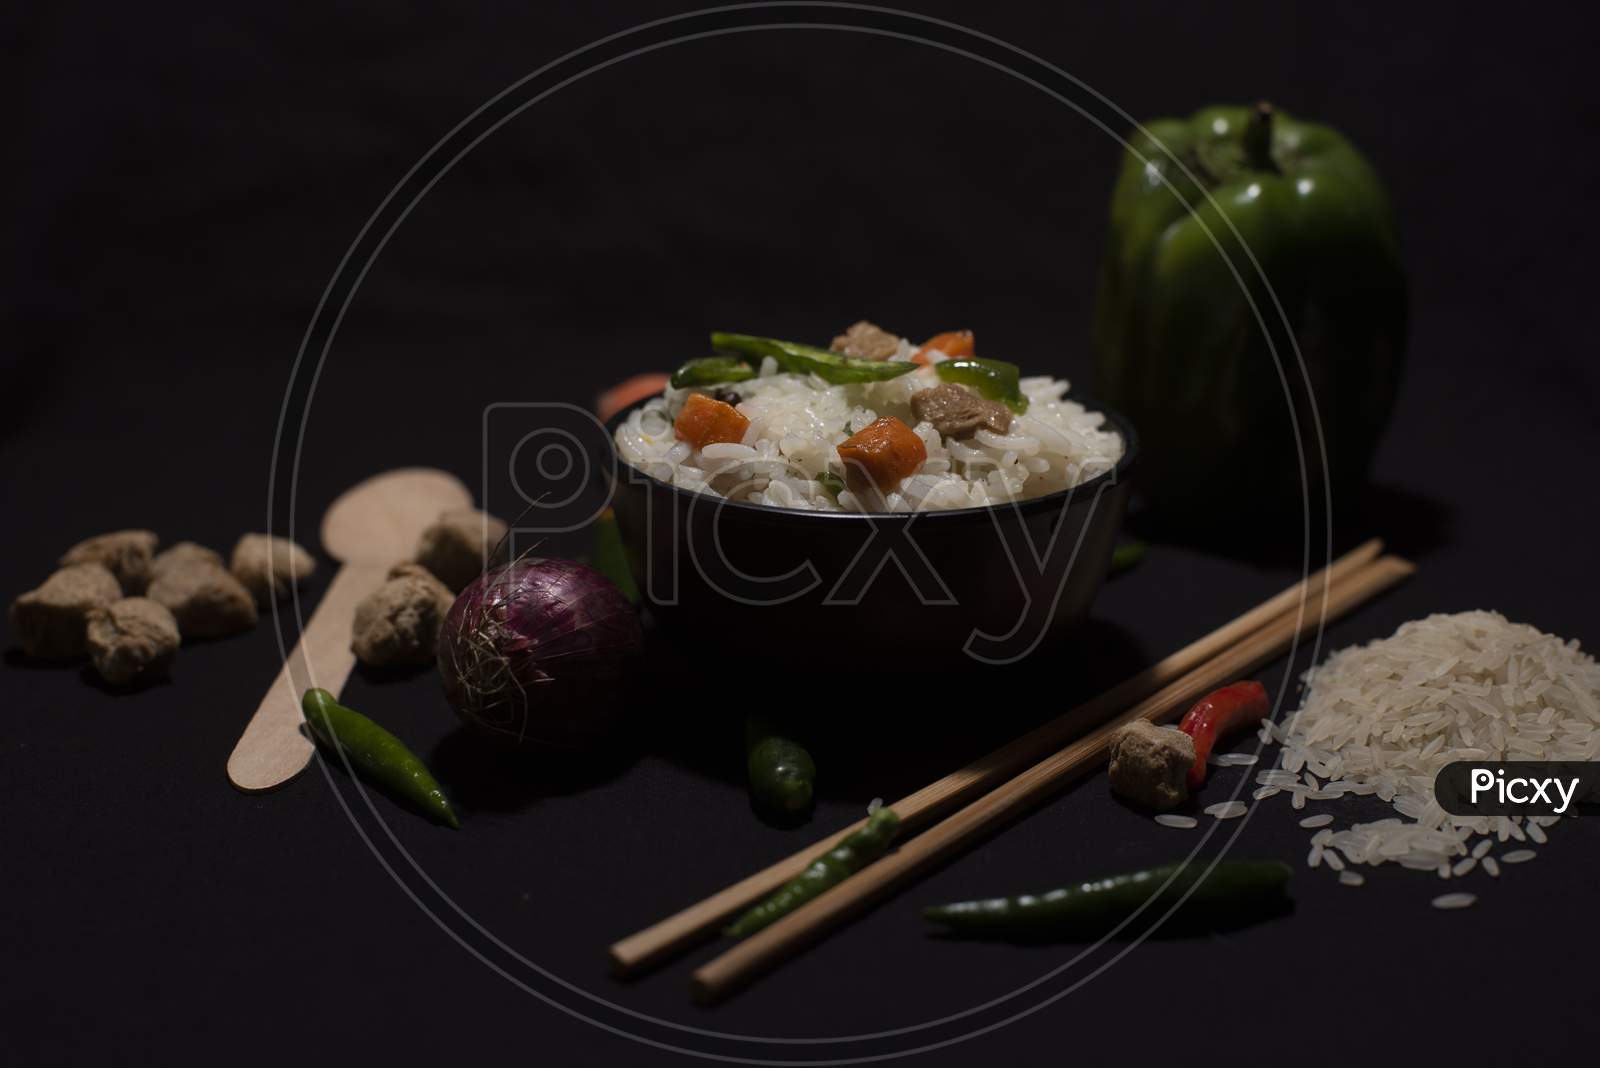 A Bowl Of A Steamed Rice And Vegetables Decorated With Veggies, Grains, Chopsticks And Spoon In A Black Copy Space Background. Food Photography.